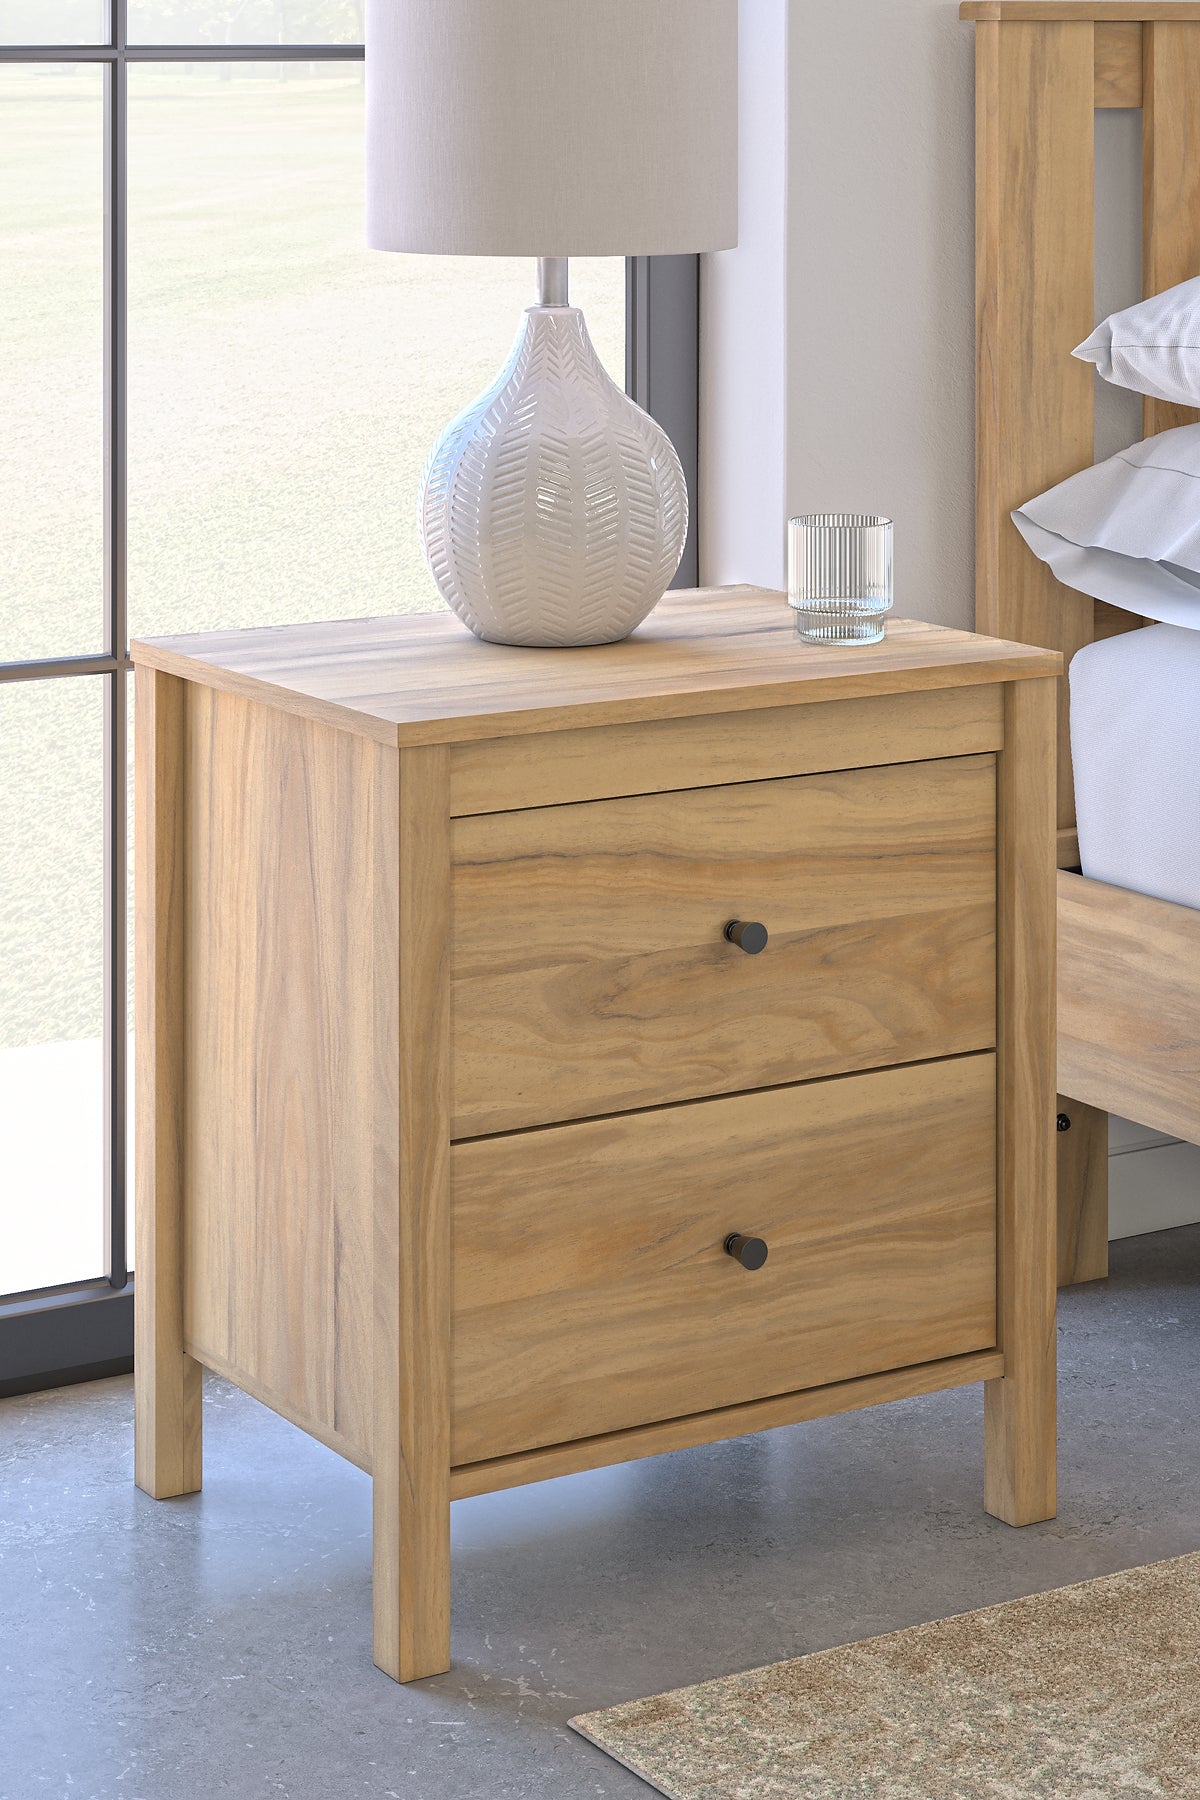 Bermacy Full Panel Headboard with Dresser and Nightstand